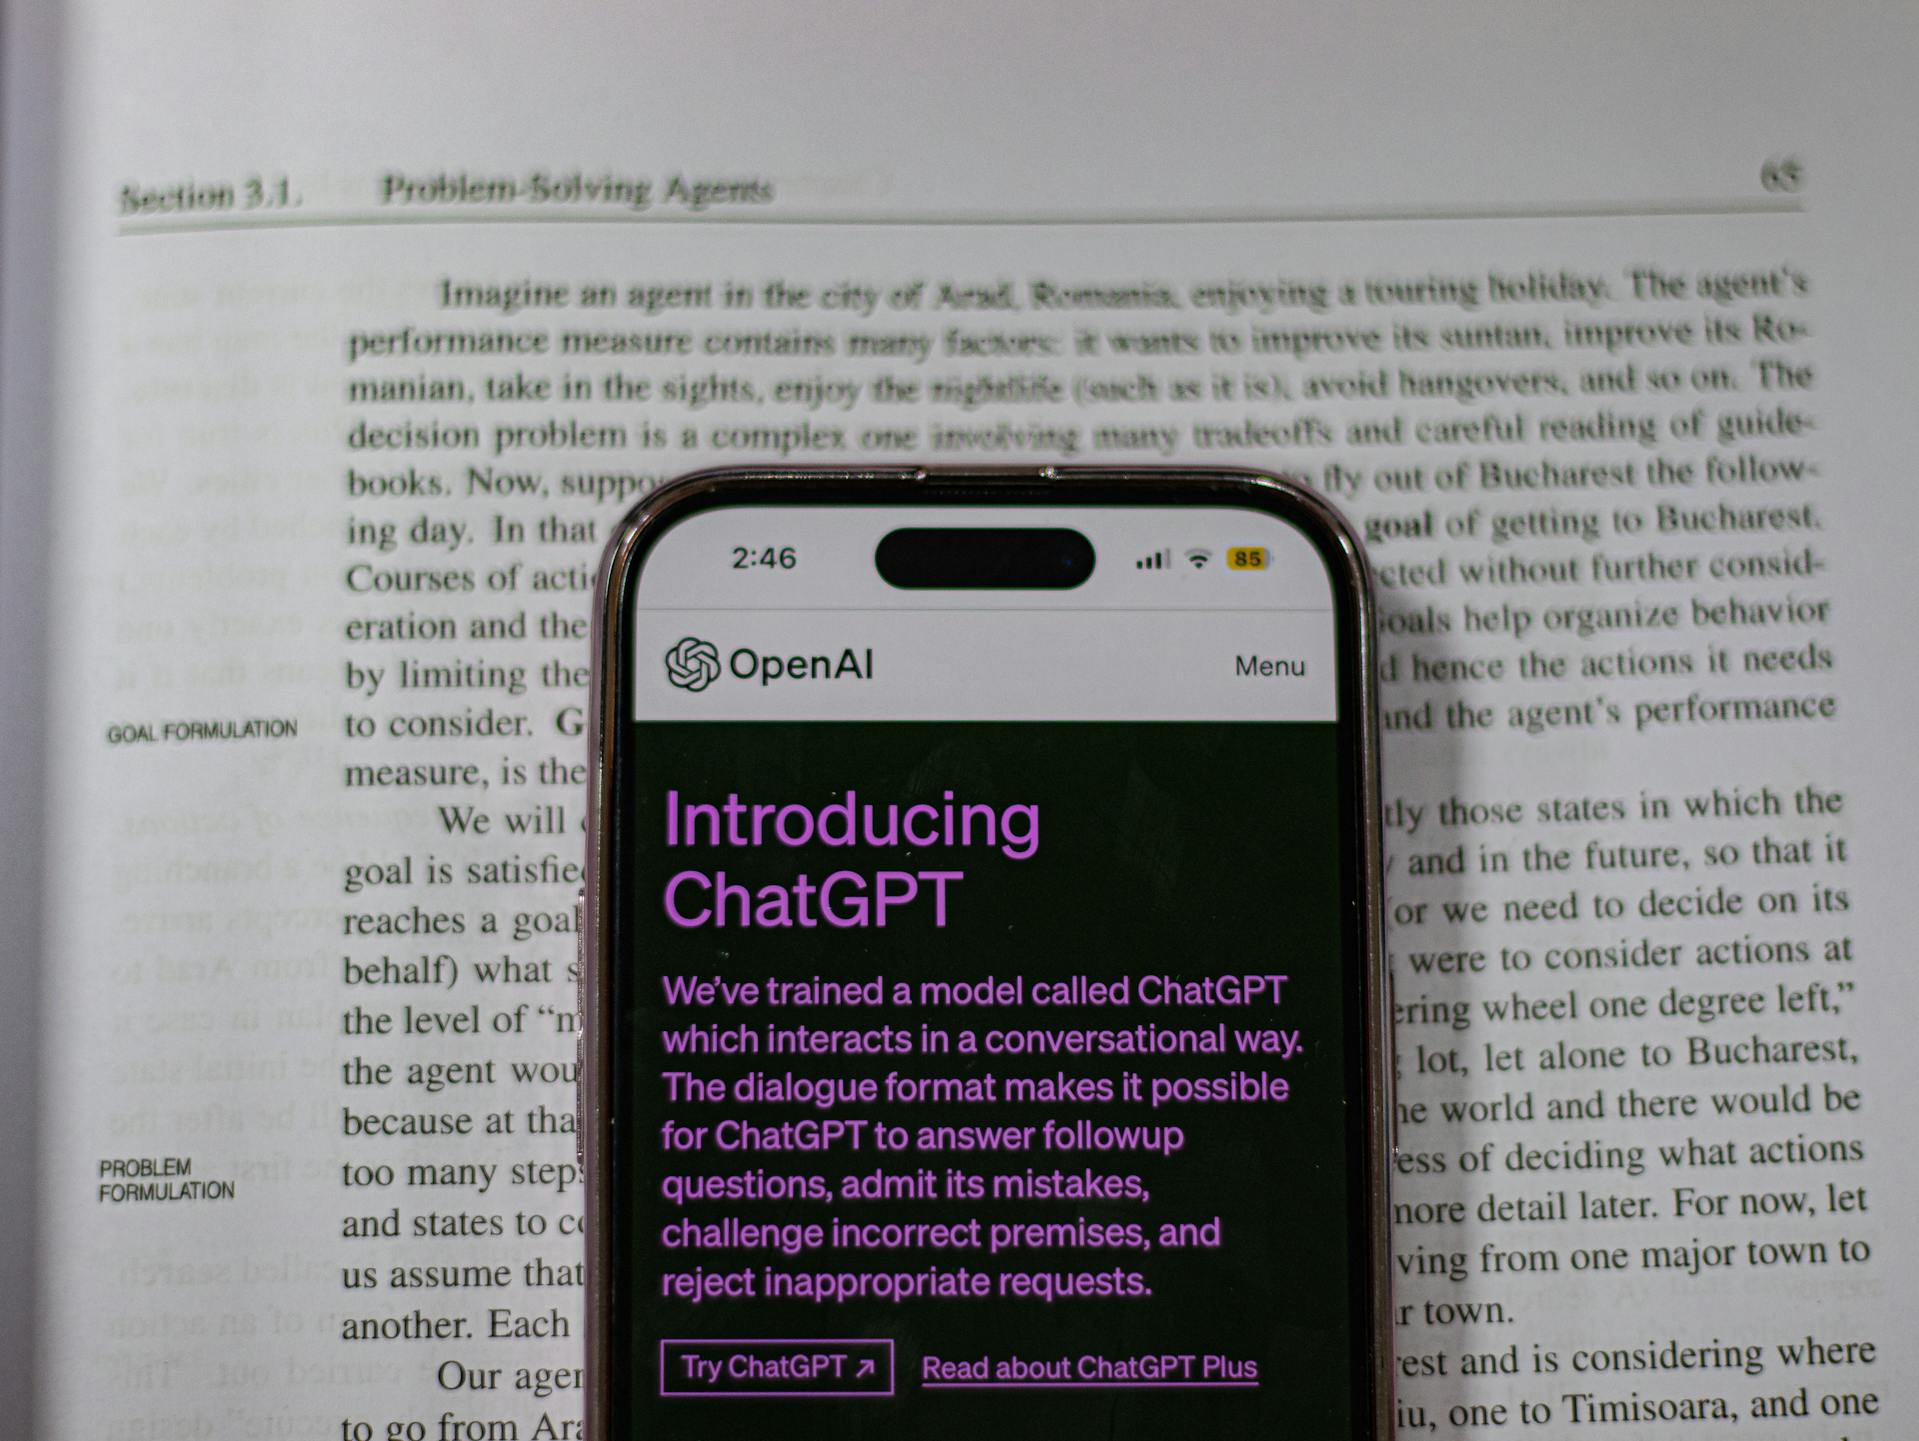 Smartphone with an introduction screen for ChatGPT, placed over a textbook discussing problem-solving agents, emphasizing the keyword 'ChatGPT social media limitations' by contrasting AI dialogue capabilities with personal storytelling needs in social media branding."